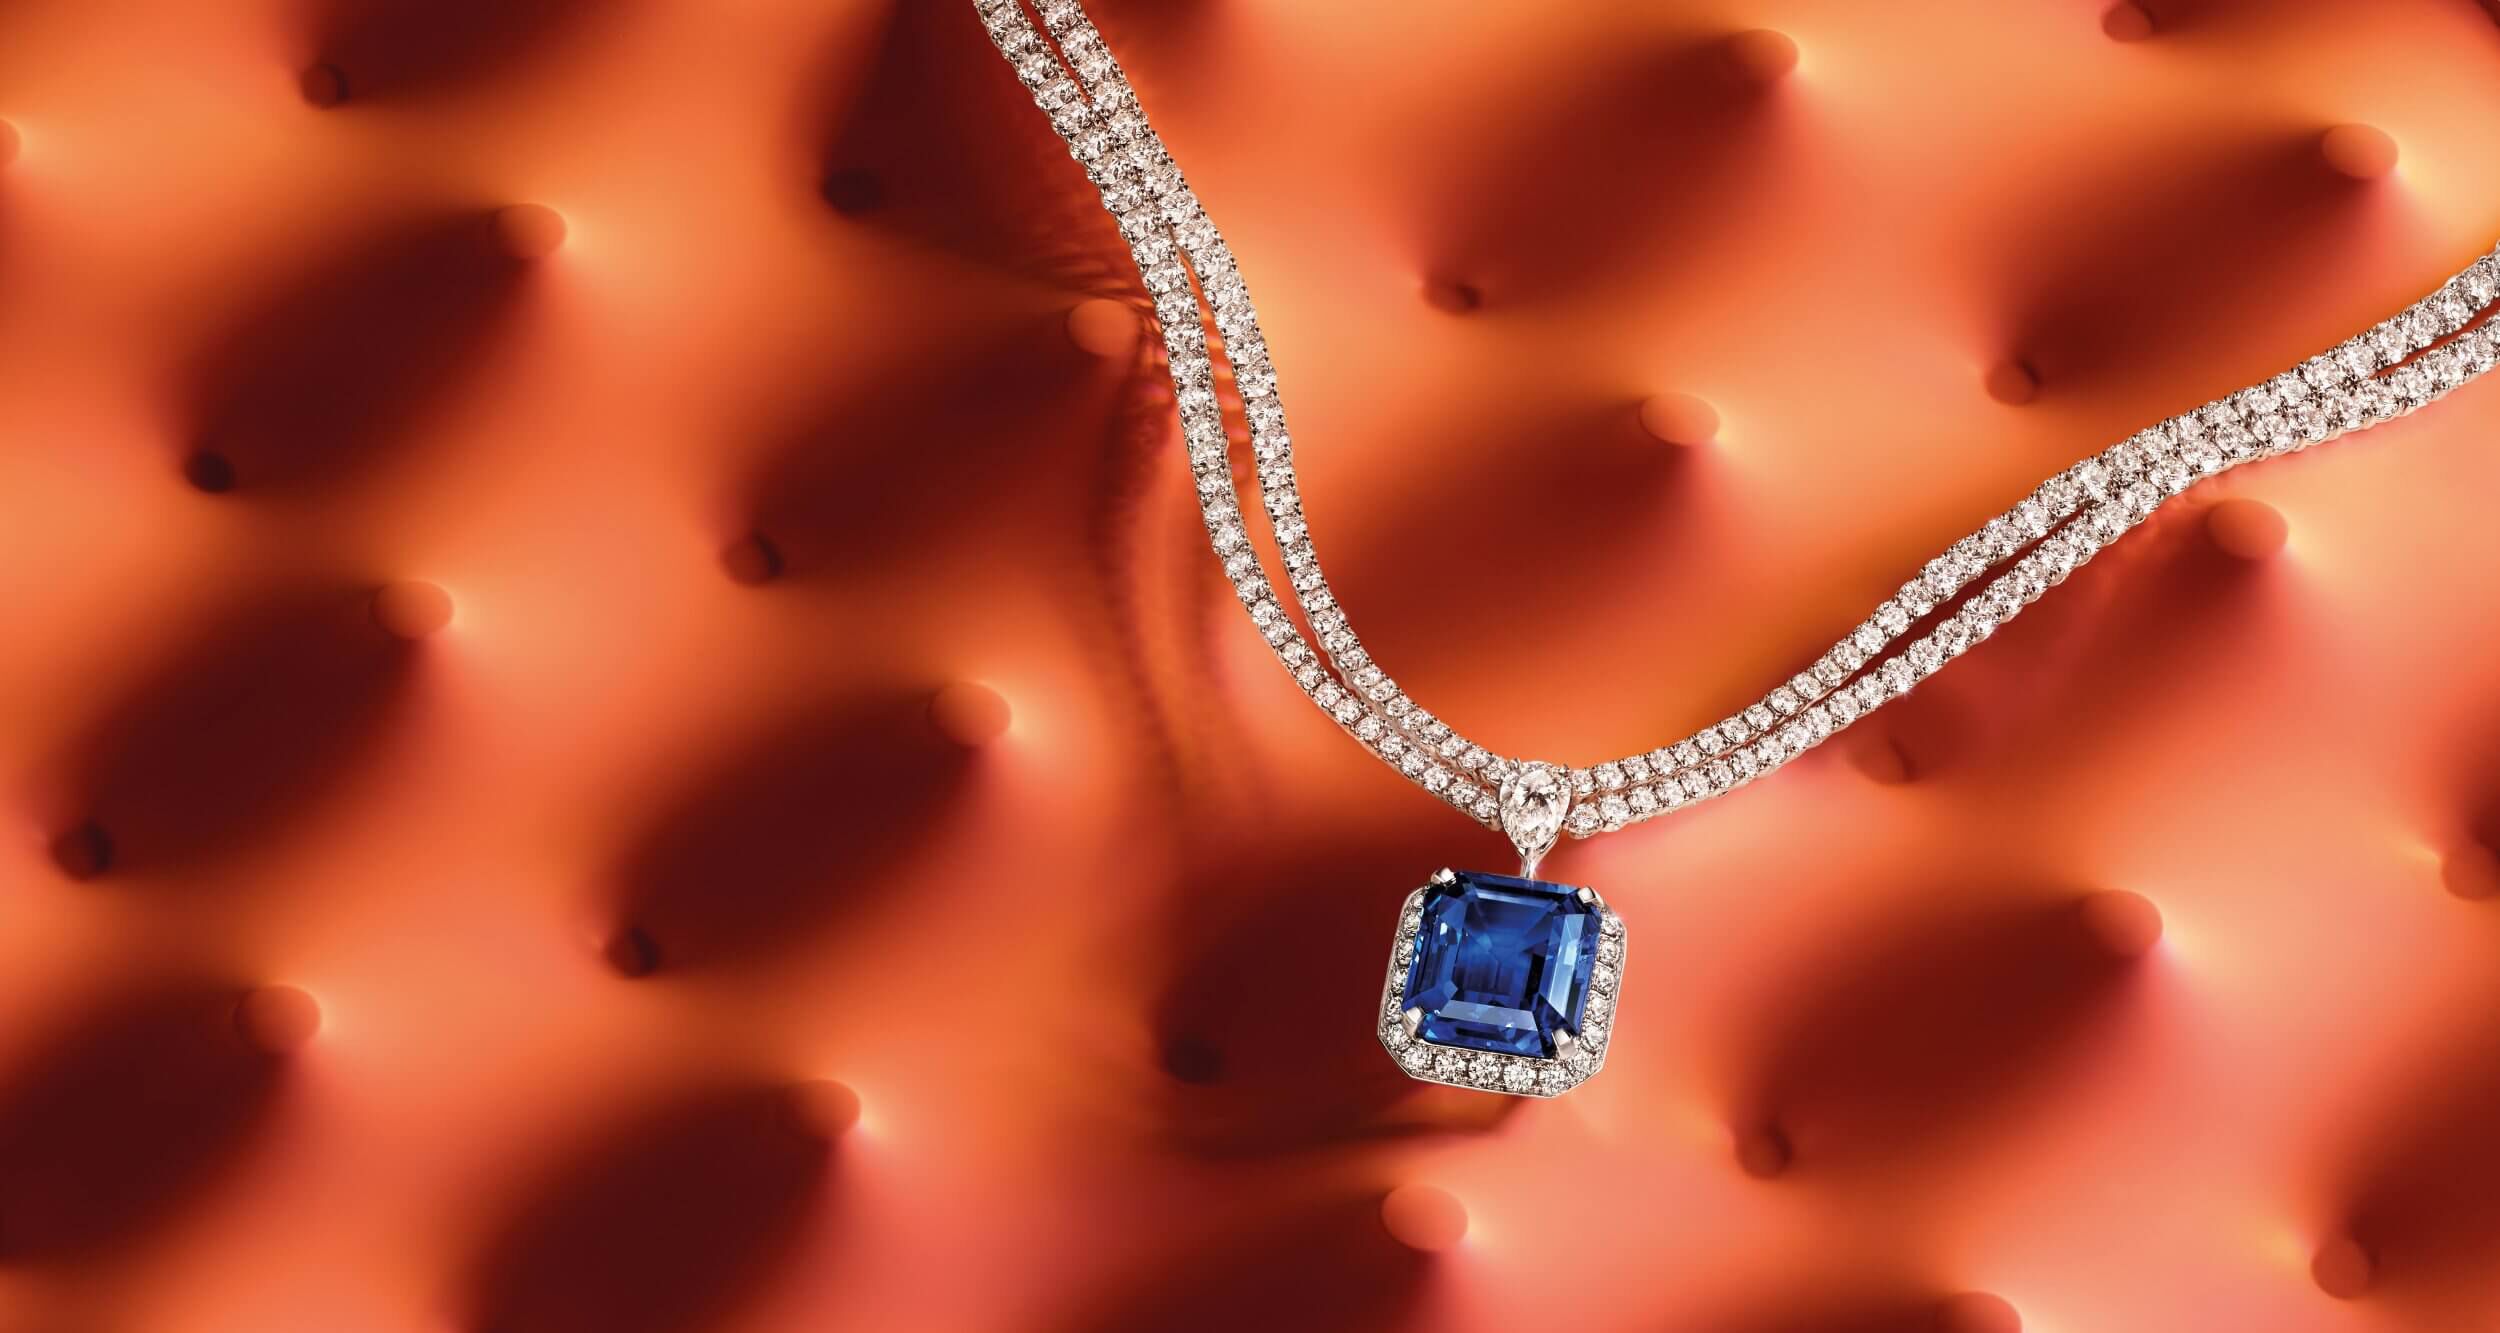 A 17 carat emerald cut sapphire and diamond necklace by Graff